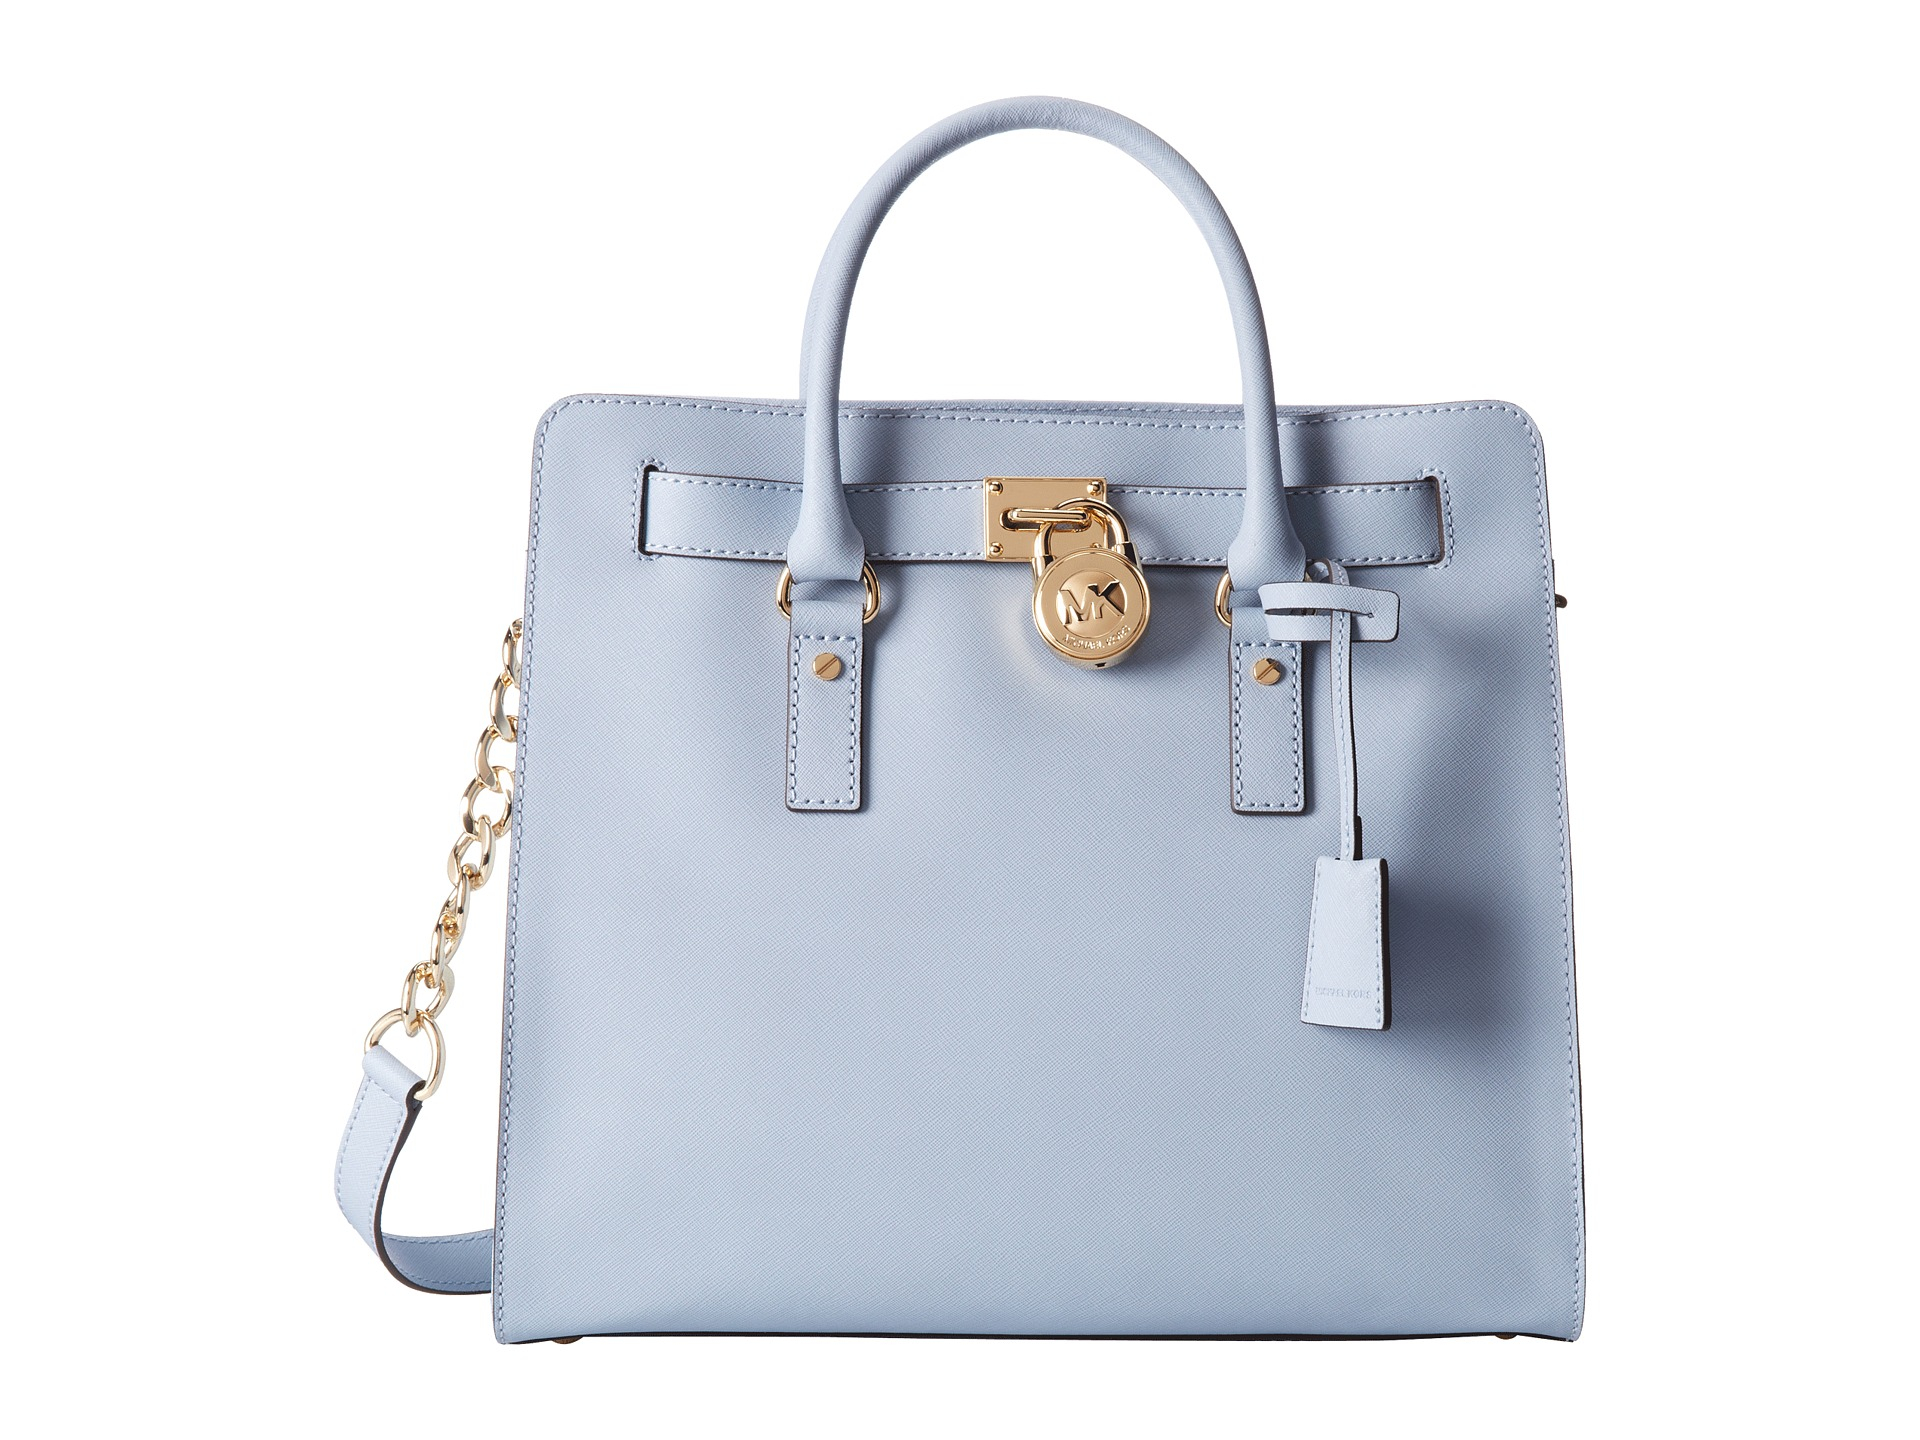 MICHAEL Michael Kors Hamilton Large North/south Tote in Pale Blue (Blue) -  Lyst